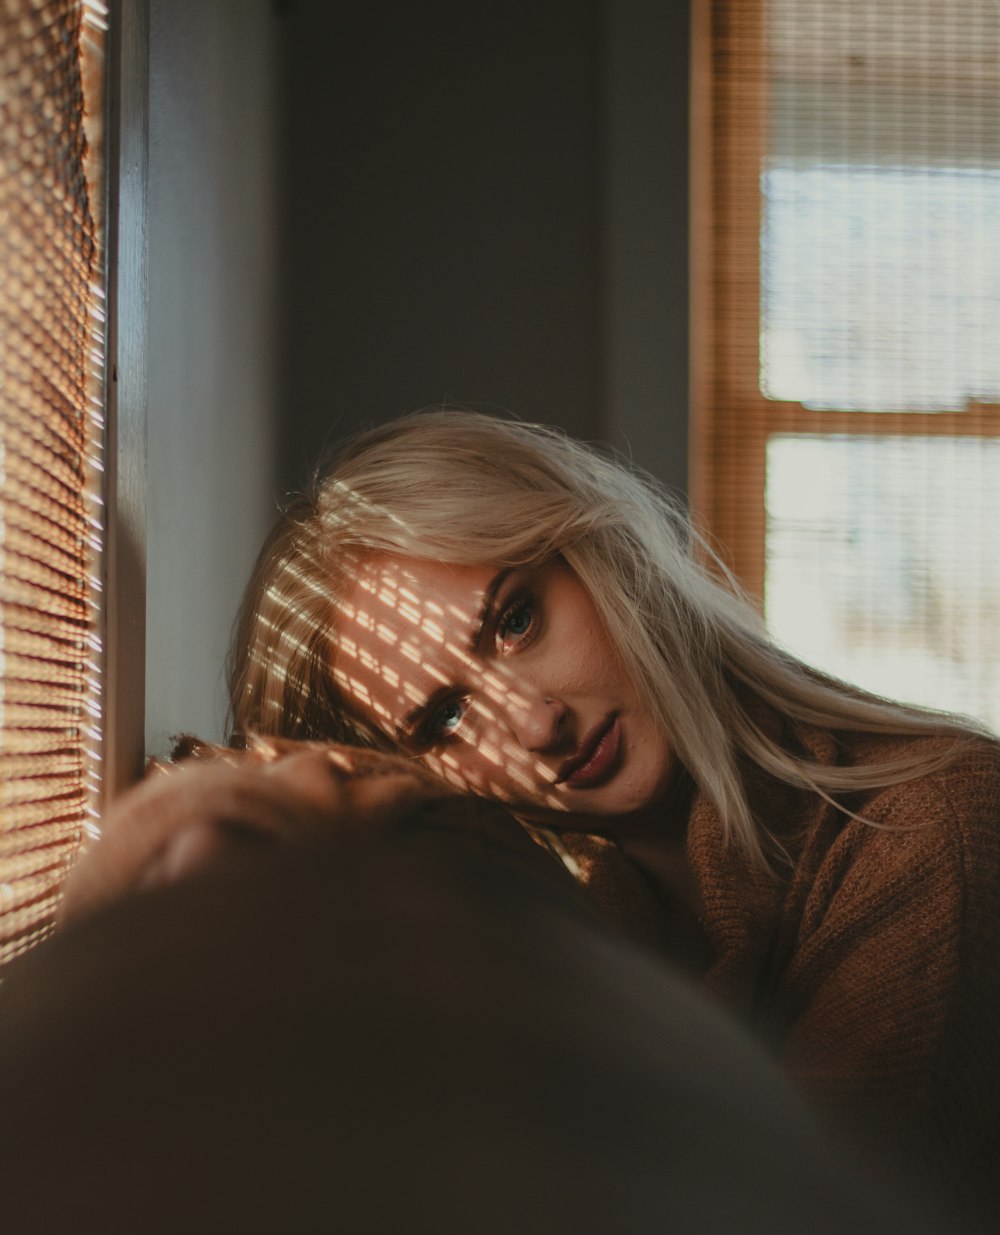 a woman with blonde hair is looking out a window